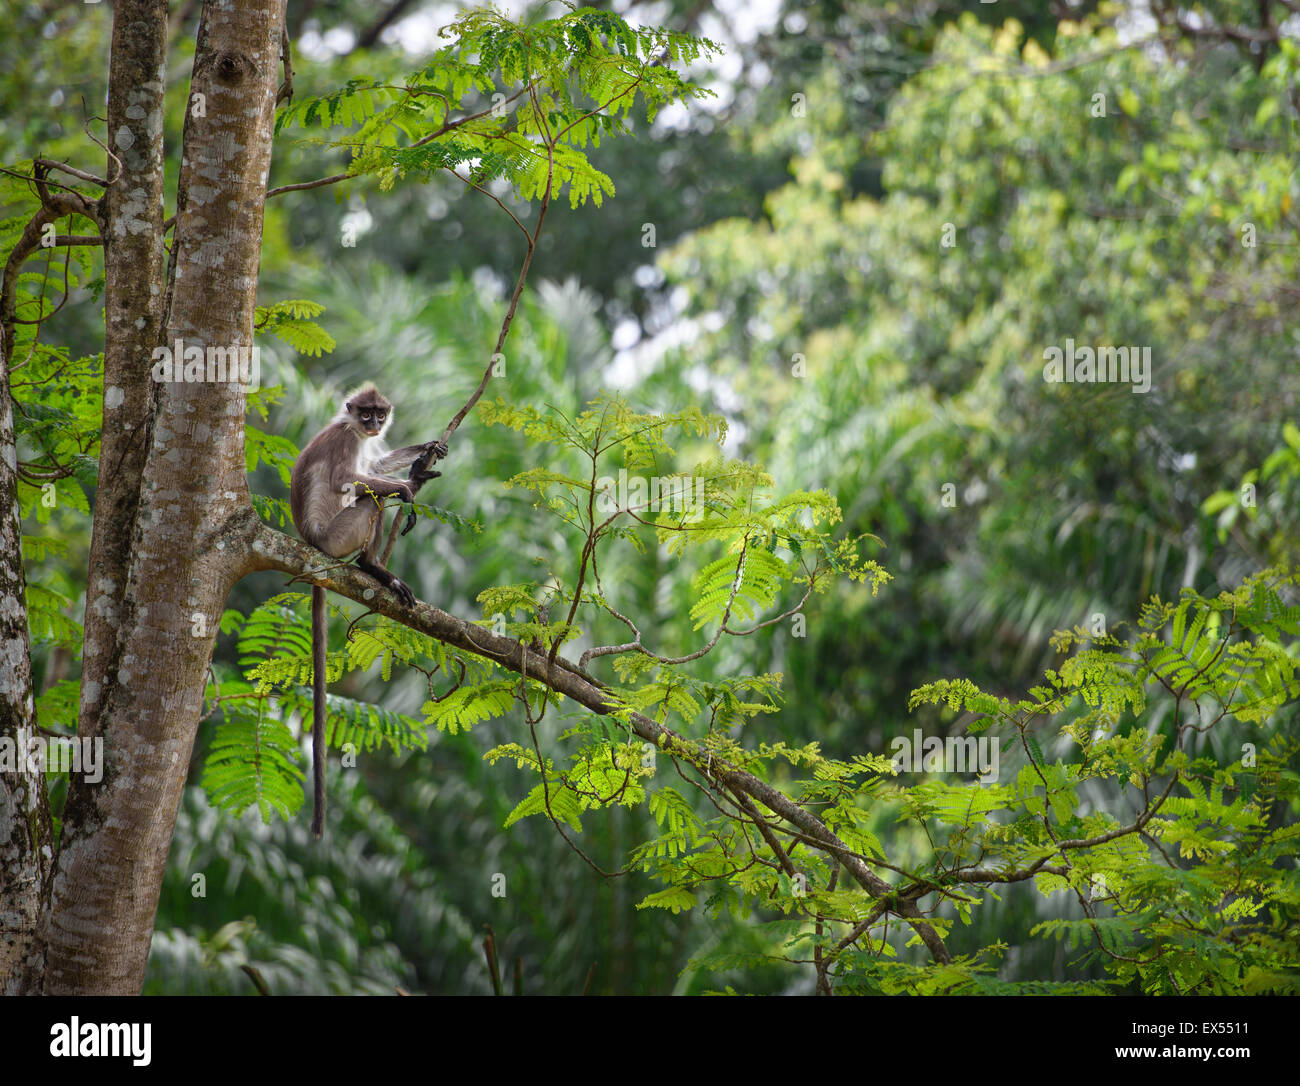 Tropical rainforest with a monkey sitting on a tree Stock Photo